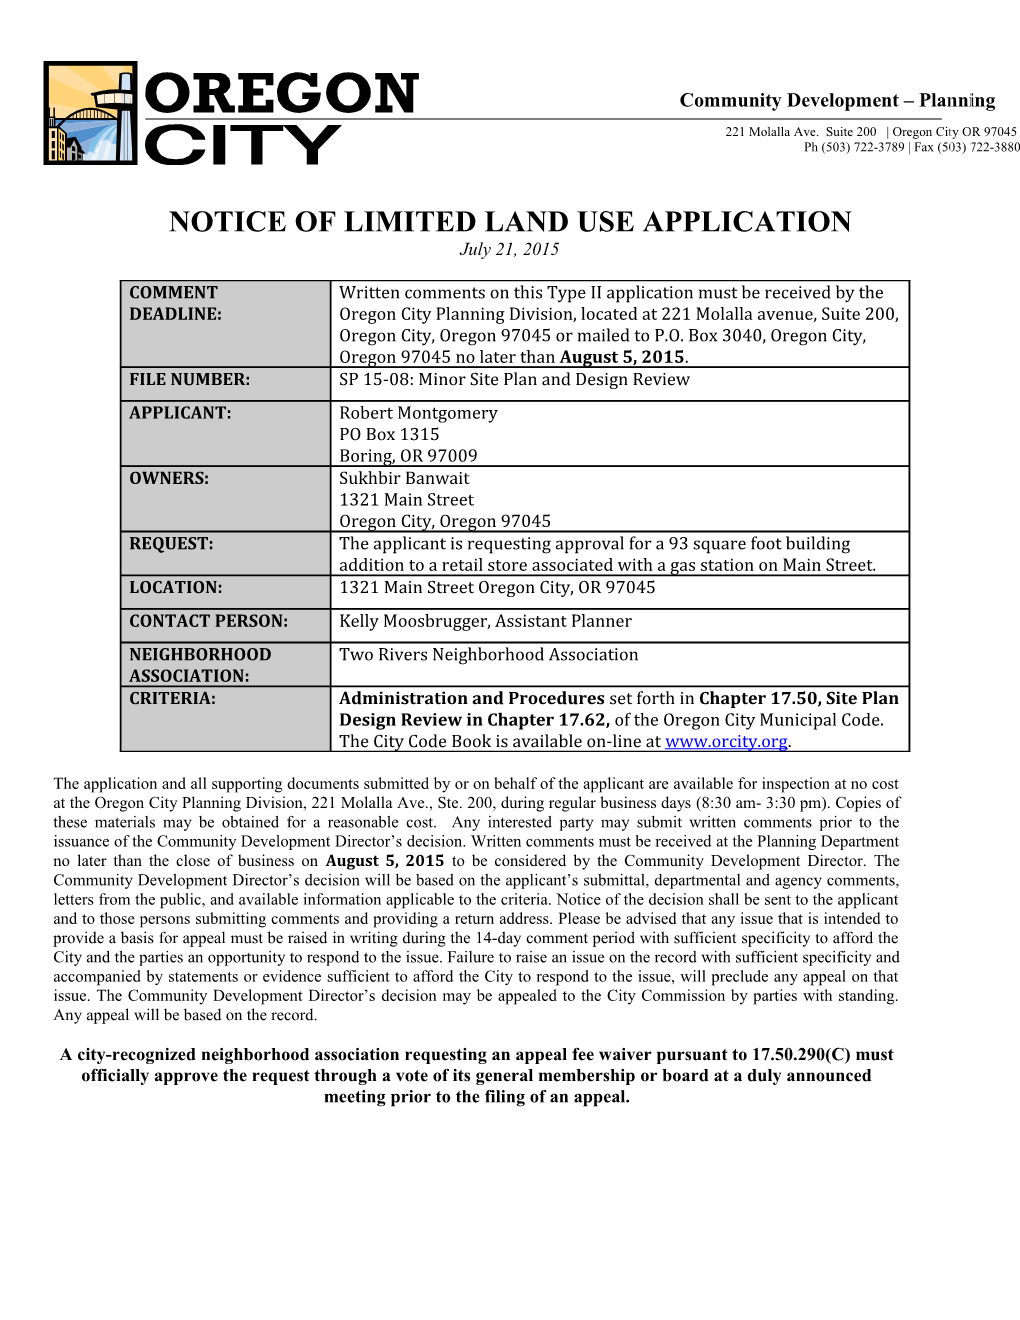 Notice of Limited Land Use Application